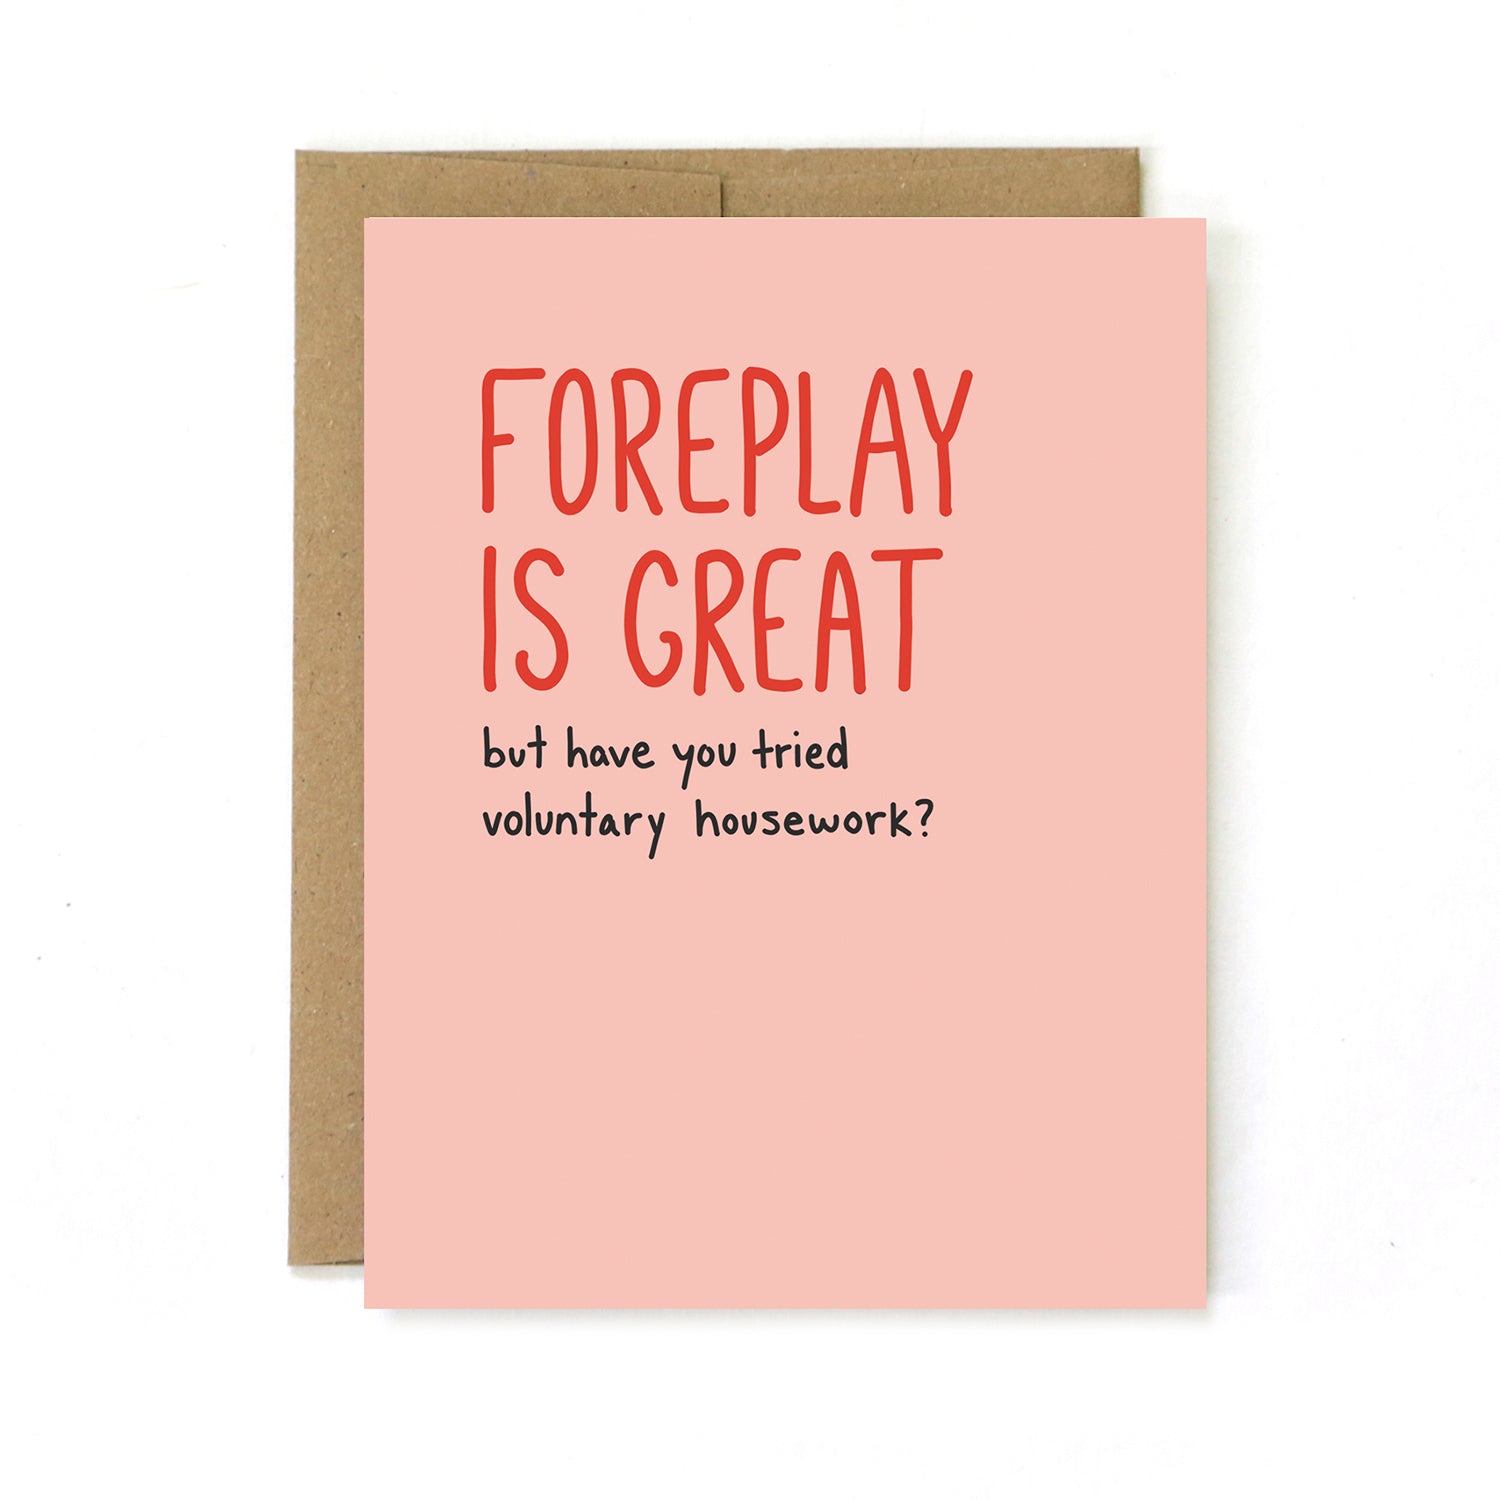 Foreplay is Great - But Have You Tried Voluntary Housework? - Greeting Card - Mellow Monkey